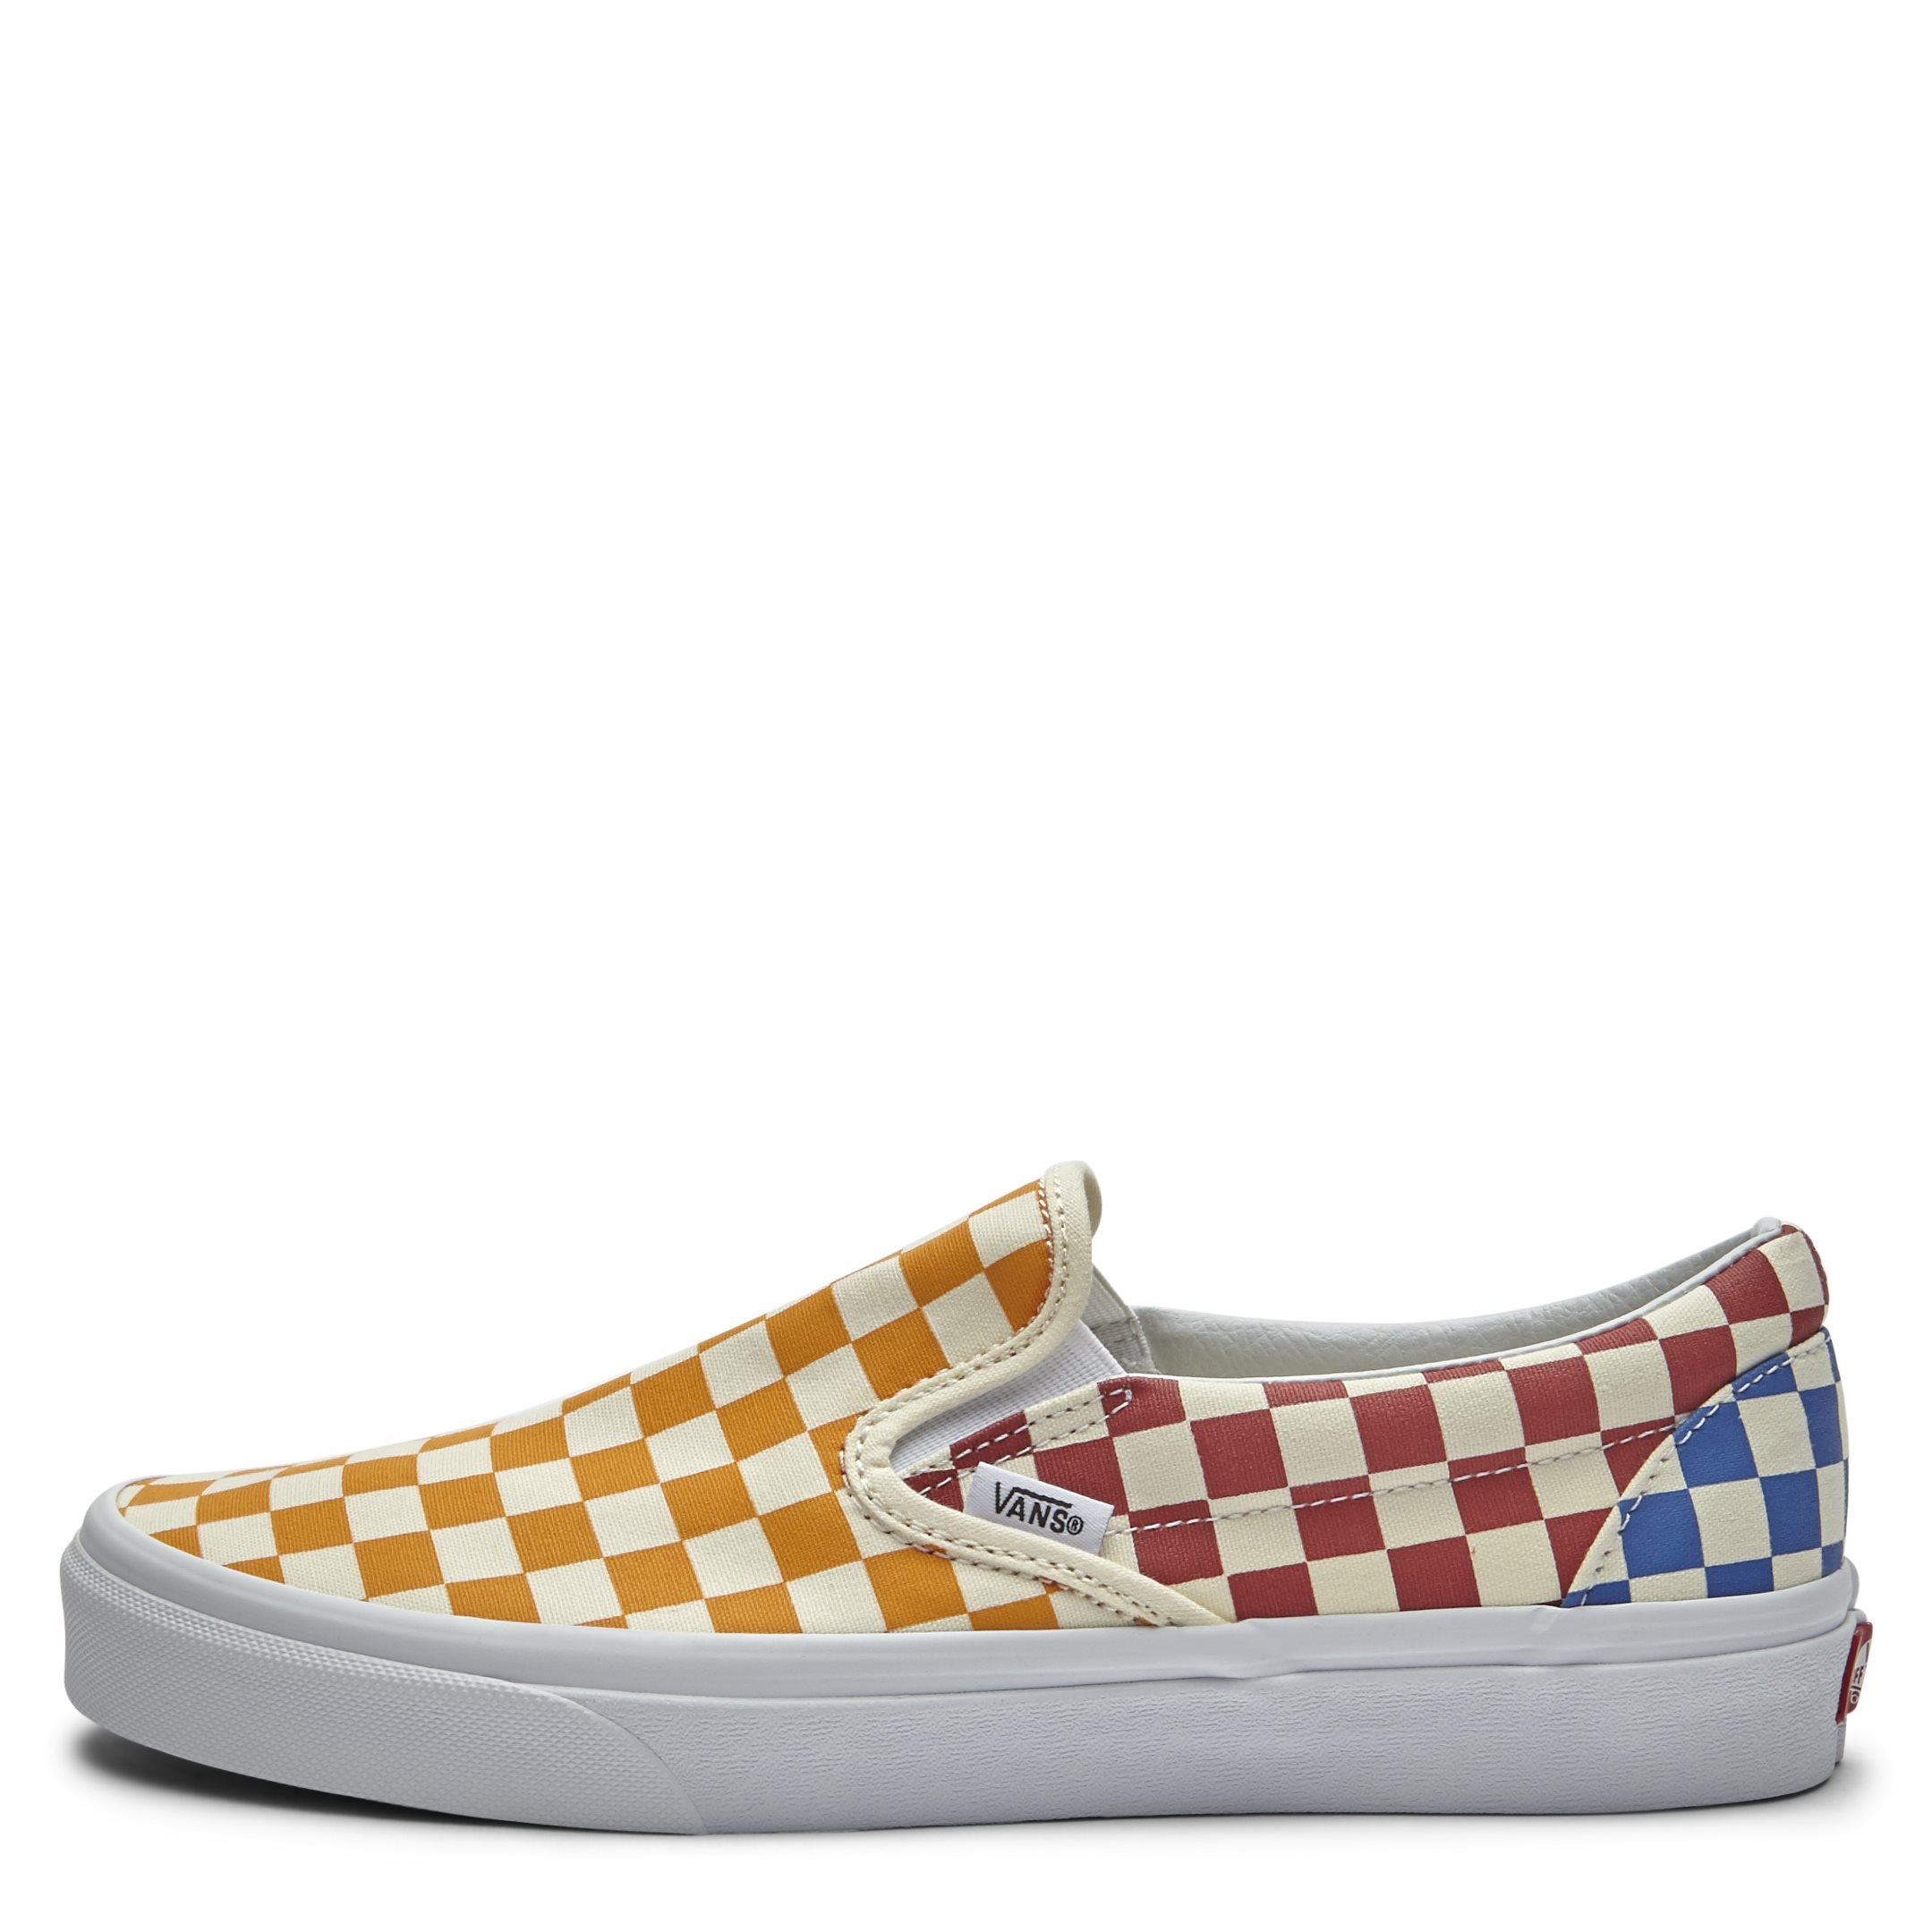 Anonym materiale Hurtigt SLIP ON VN0A38F7VLV Shoes GUL from Vans 27 EUR